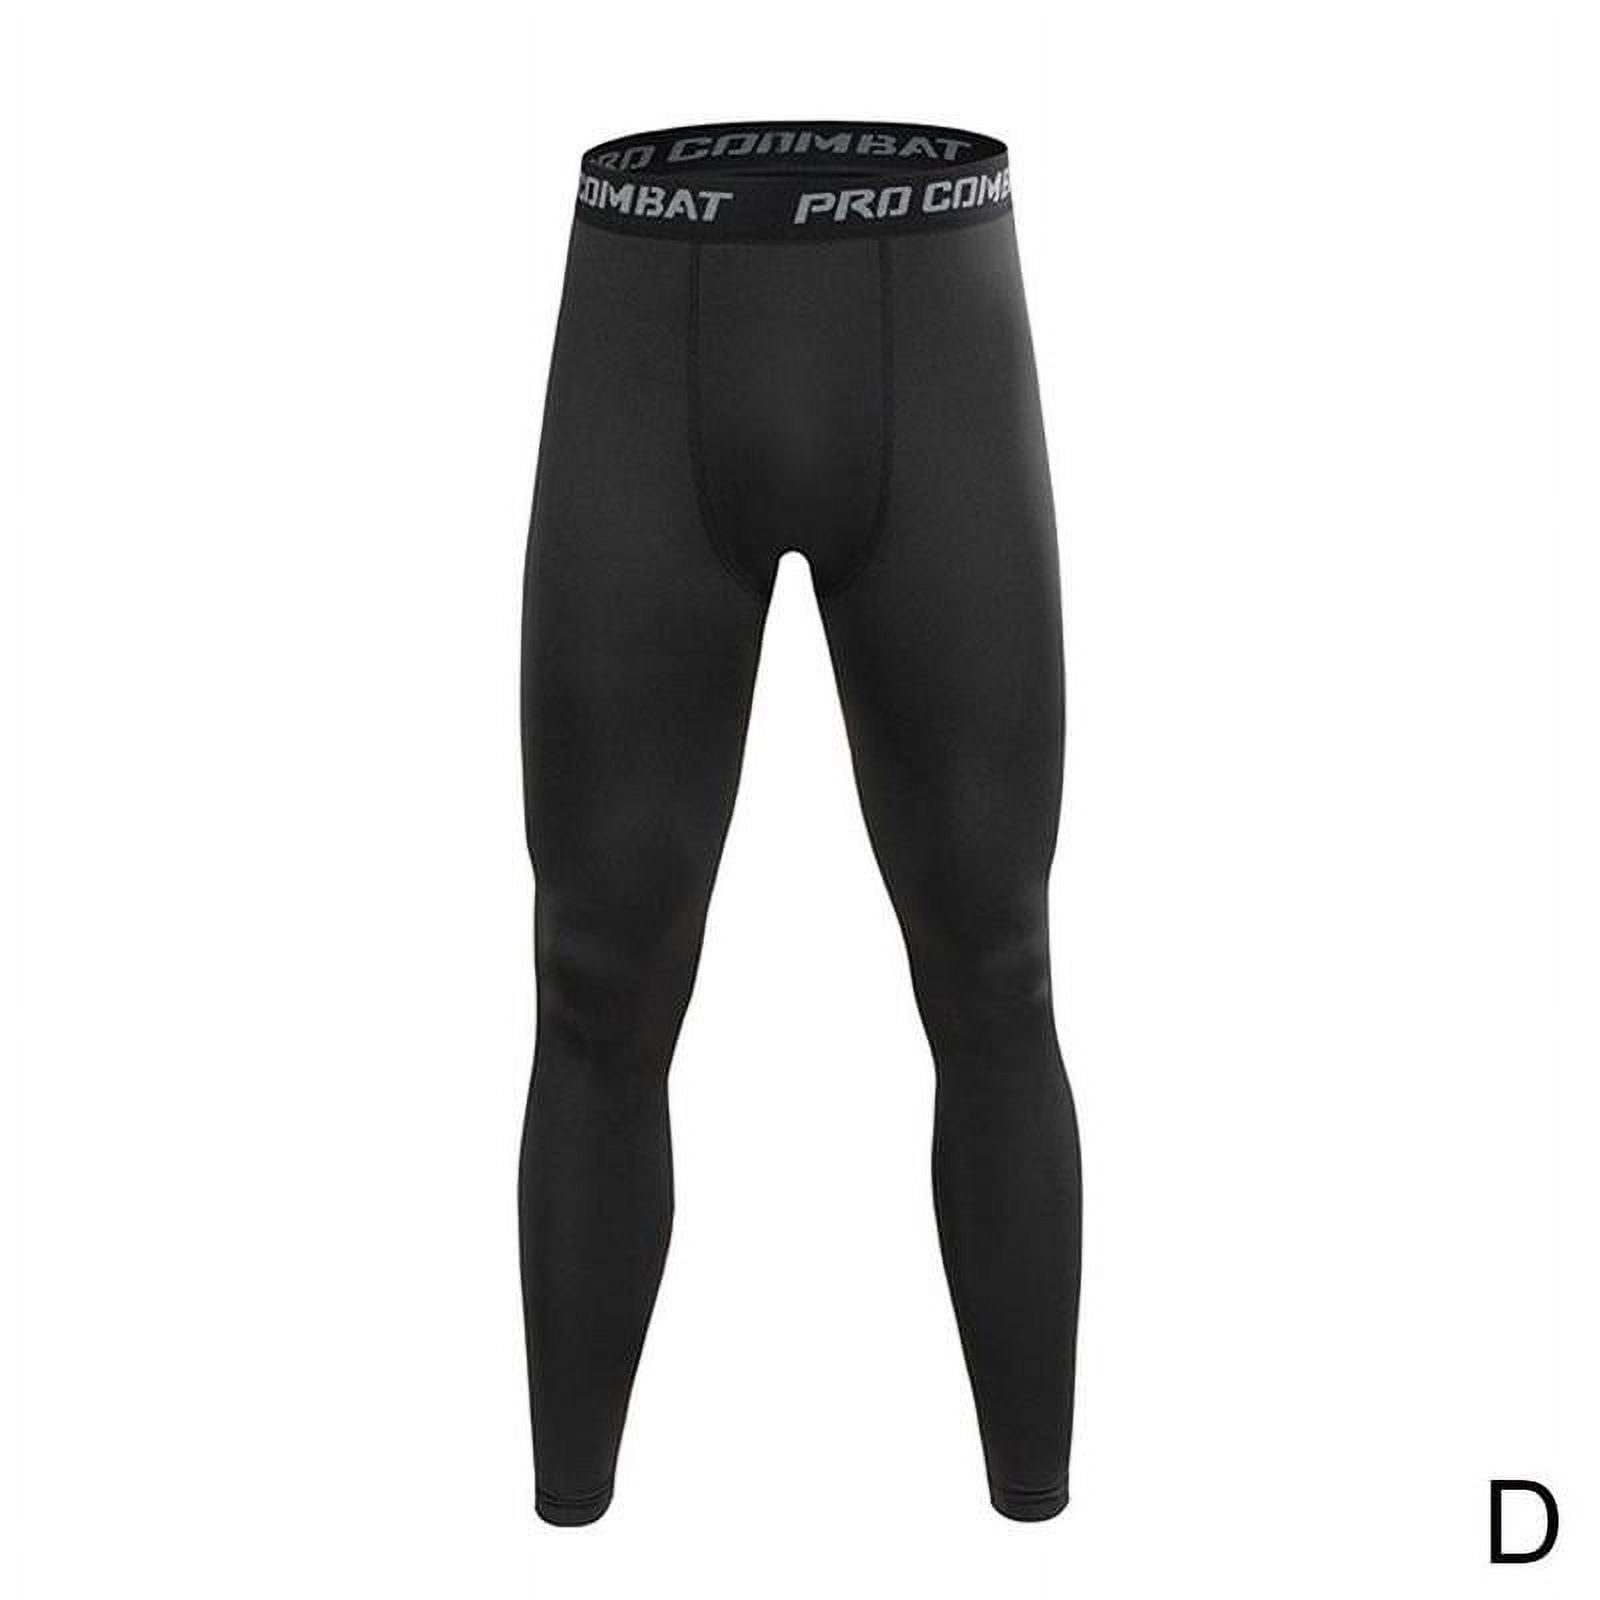 Men's Compression Leggings Pants Trousers Running Fitness Baskerball ...